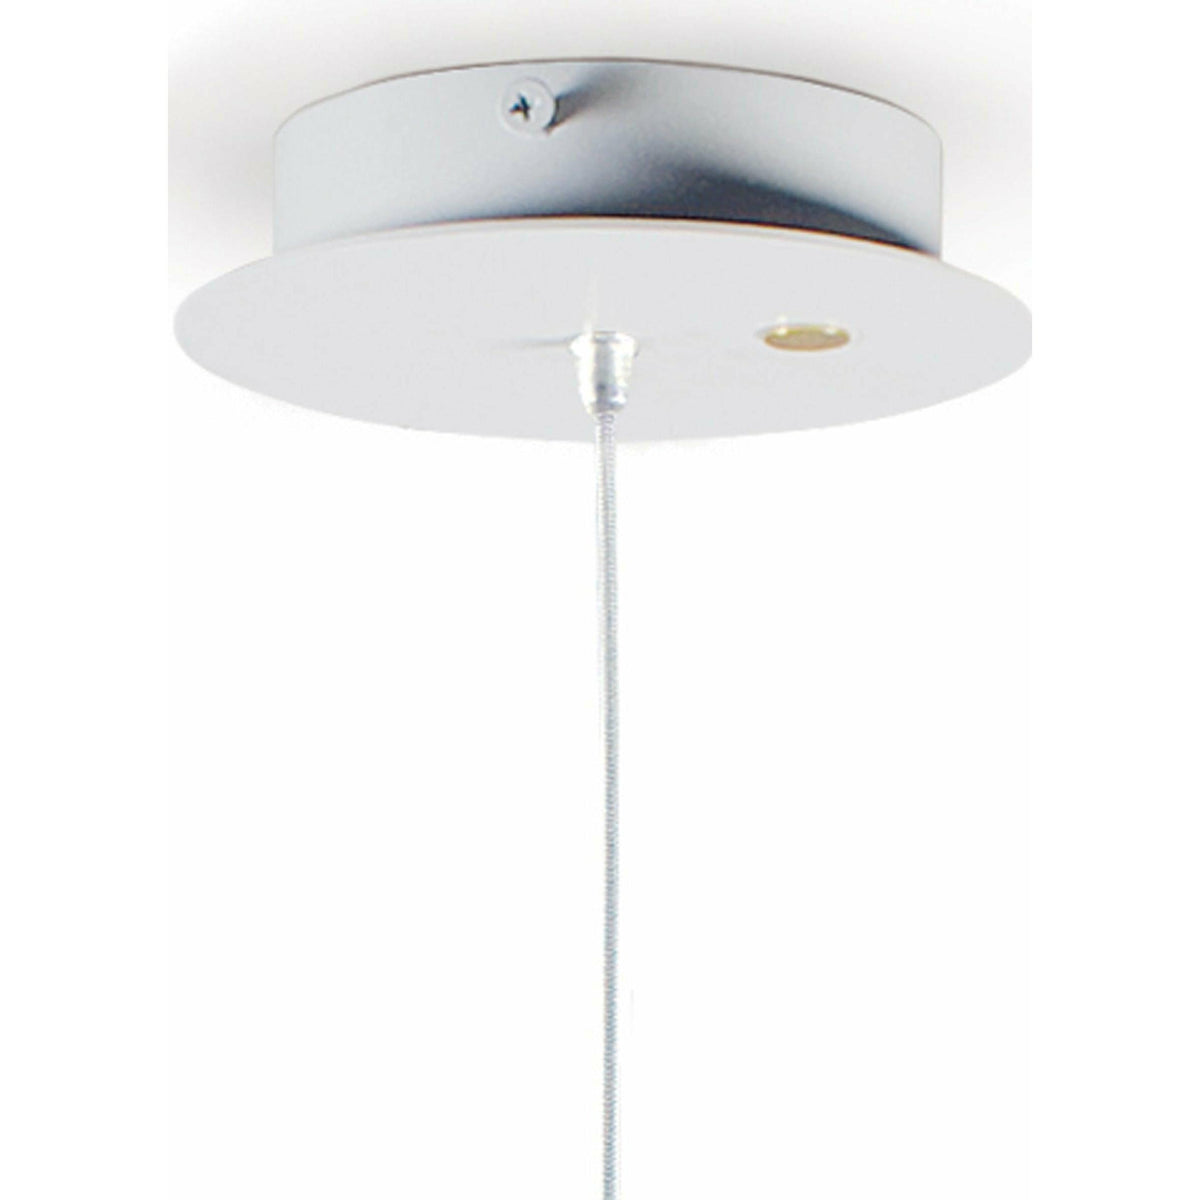 Lladro - Mademoiselle Béatrice Ceiling Lamp - 01023534 | Montreal Lighting & Hardware